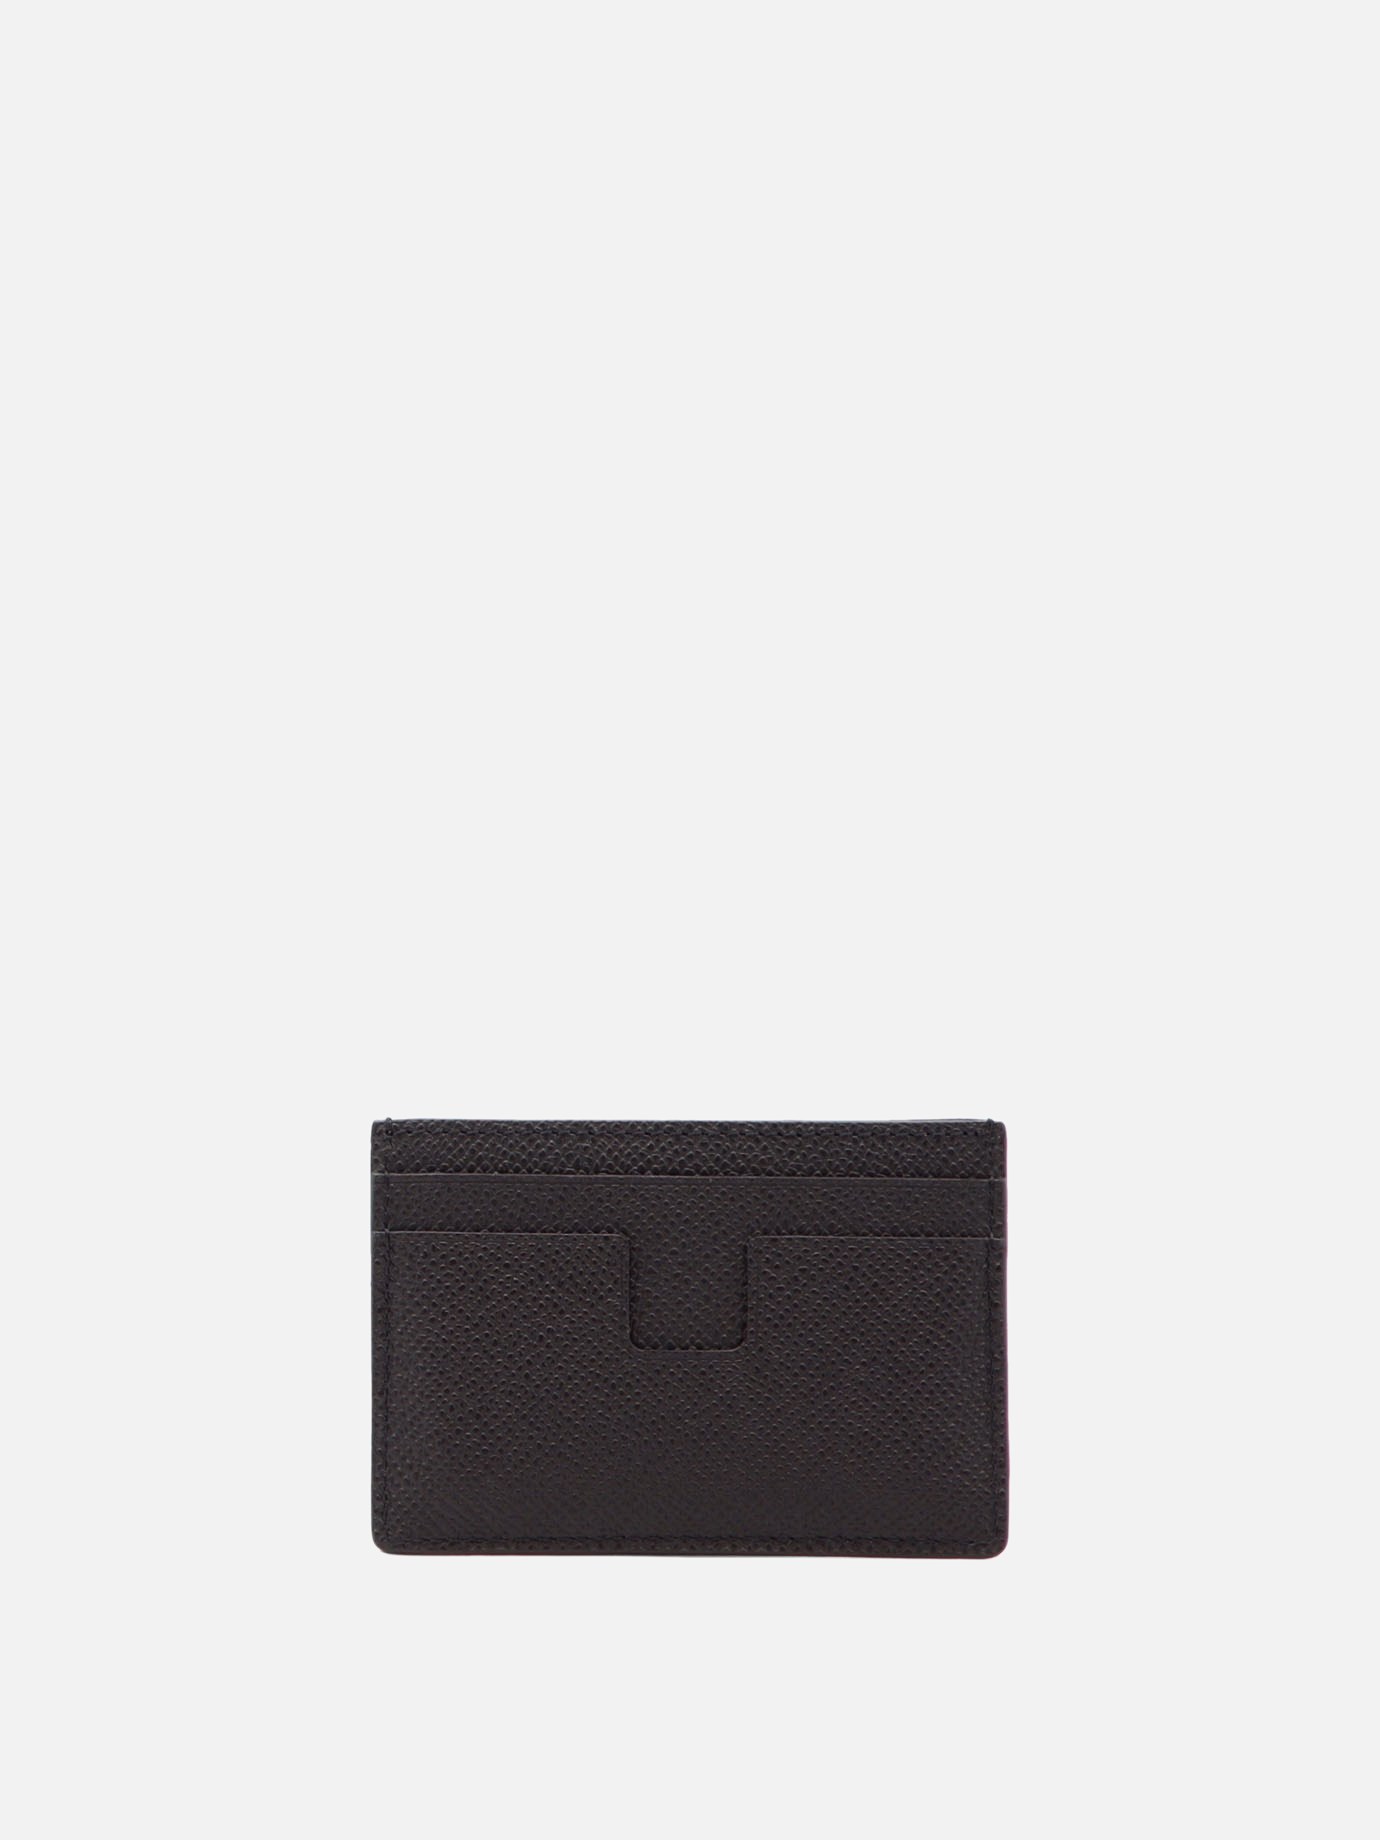  TF  card holder by Tom Ford